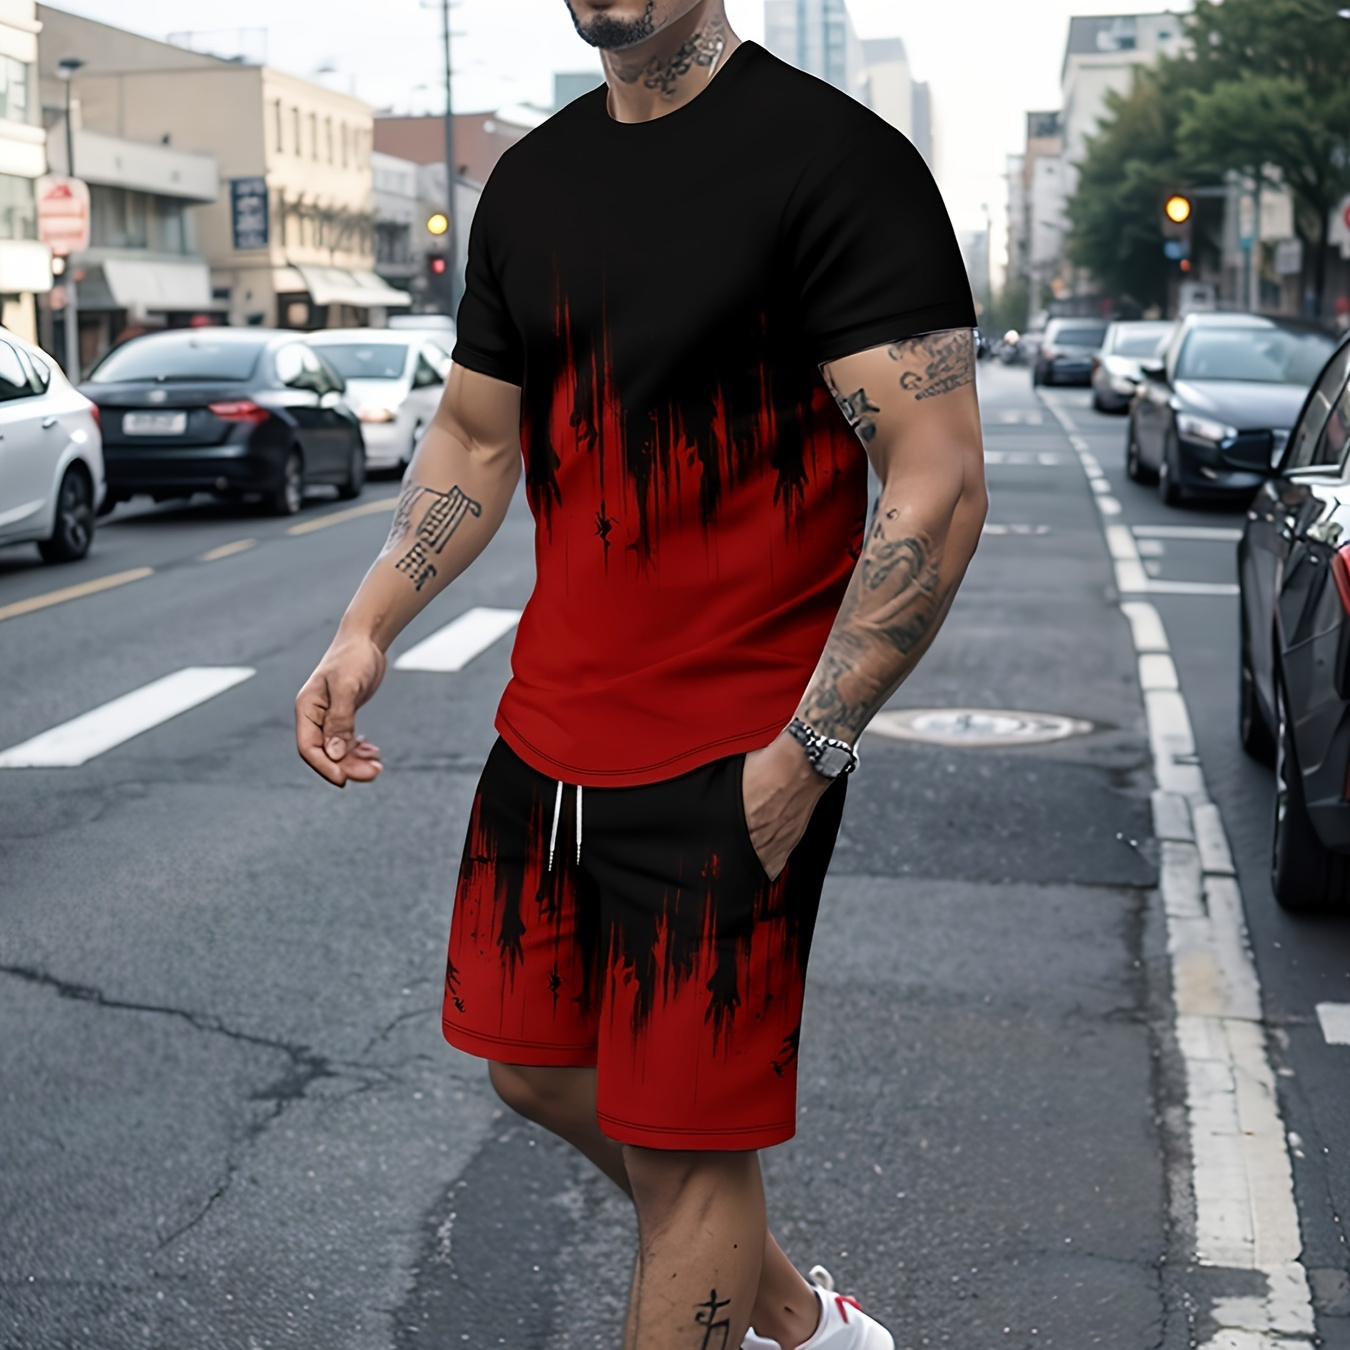 

3d Pattern Print, 2pcs Outfits For Men, Casual Crew Neck Short Sleeve T-shirt Tee And Drawstring Shorts Set For Summer, Men's Clothing Loungewear Vacation Workout